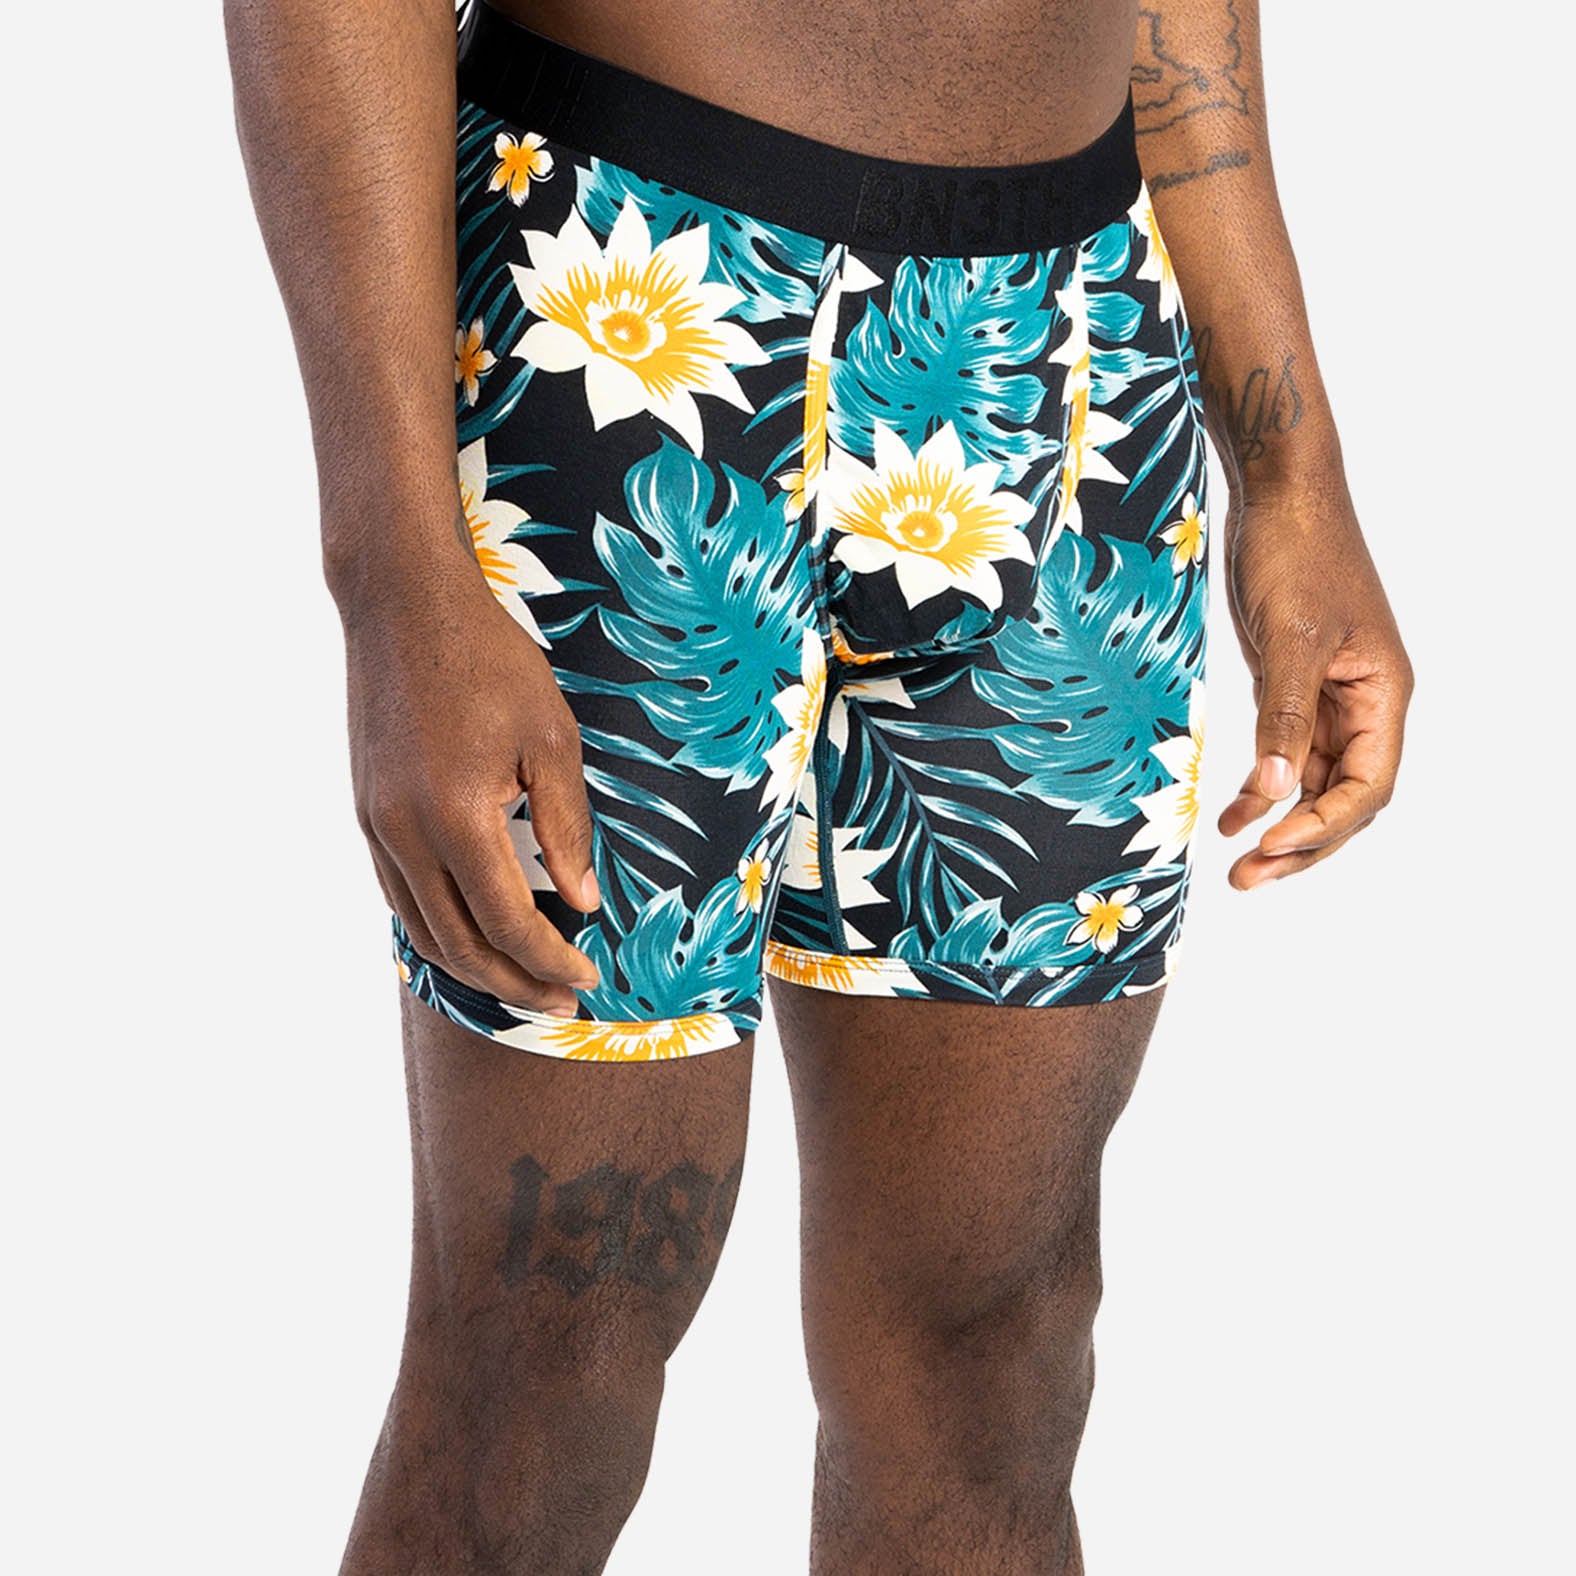 CLASSIC BOXER BRIEF WITH FLY: TROPICAL FLORAL BLACK